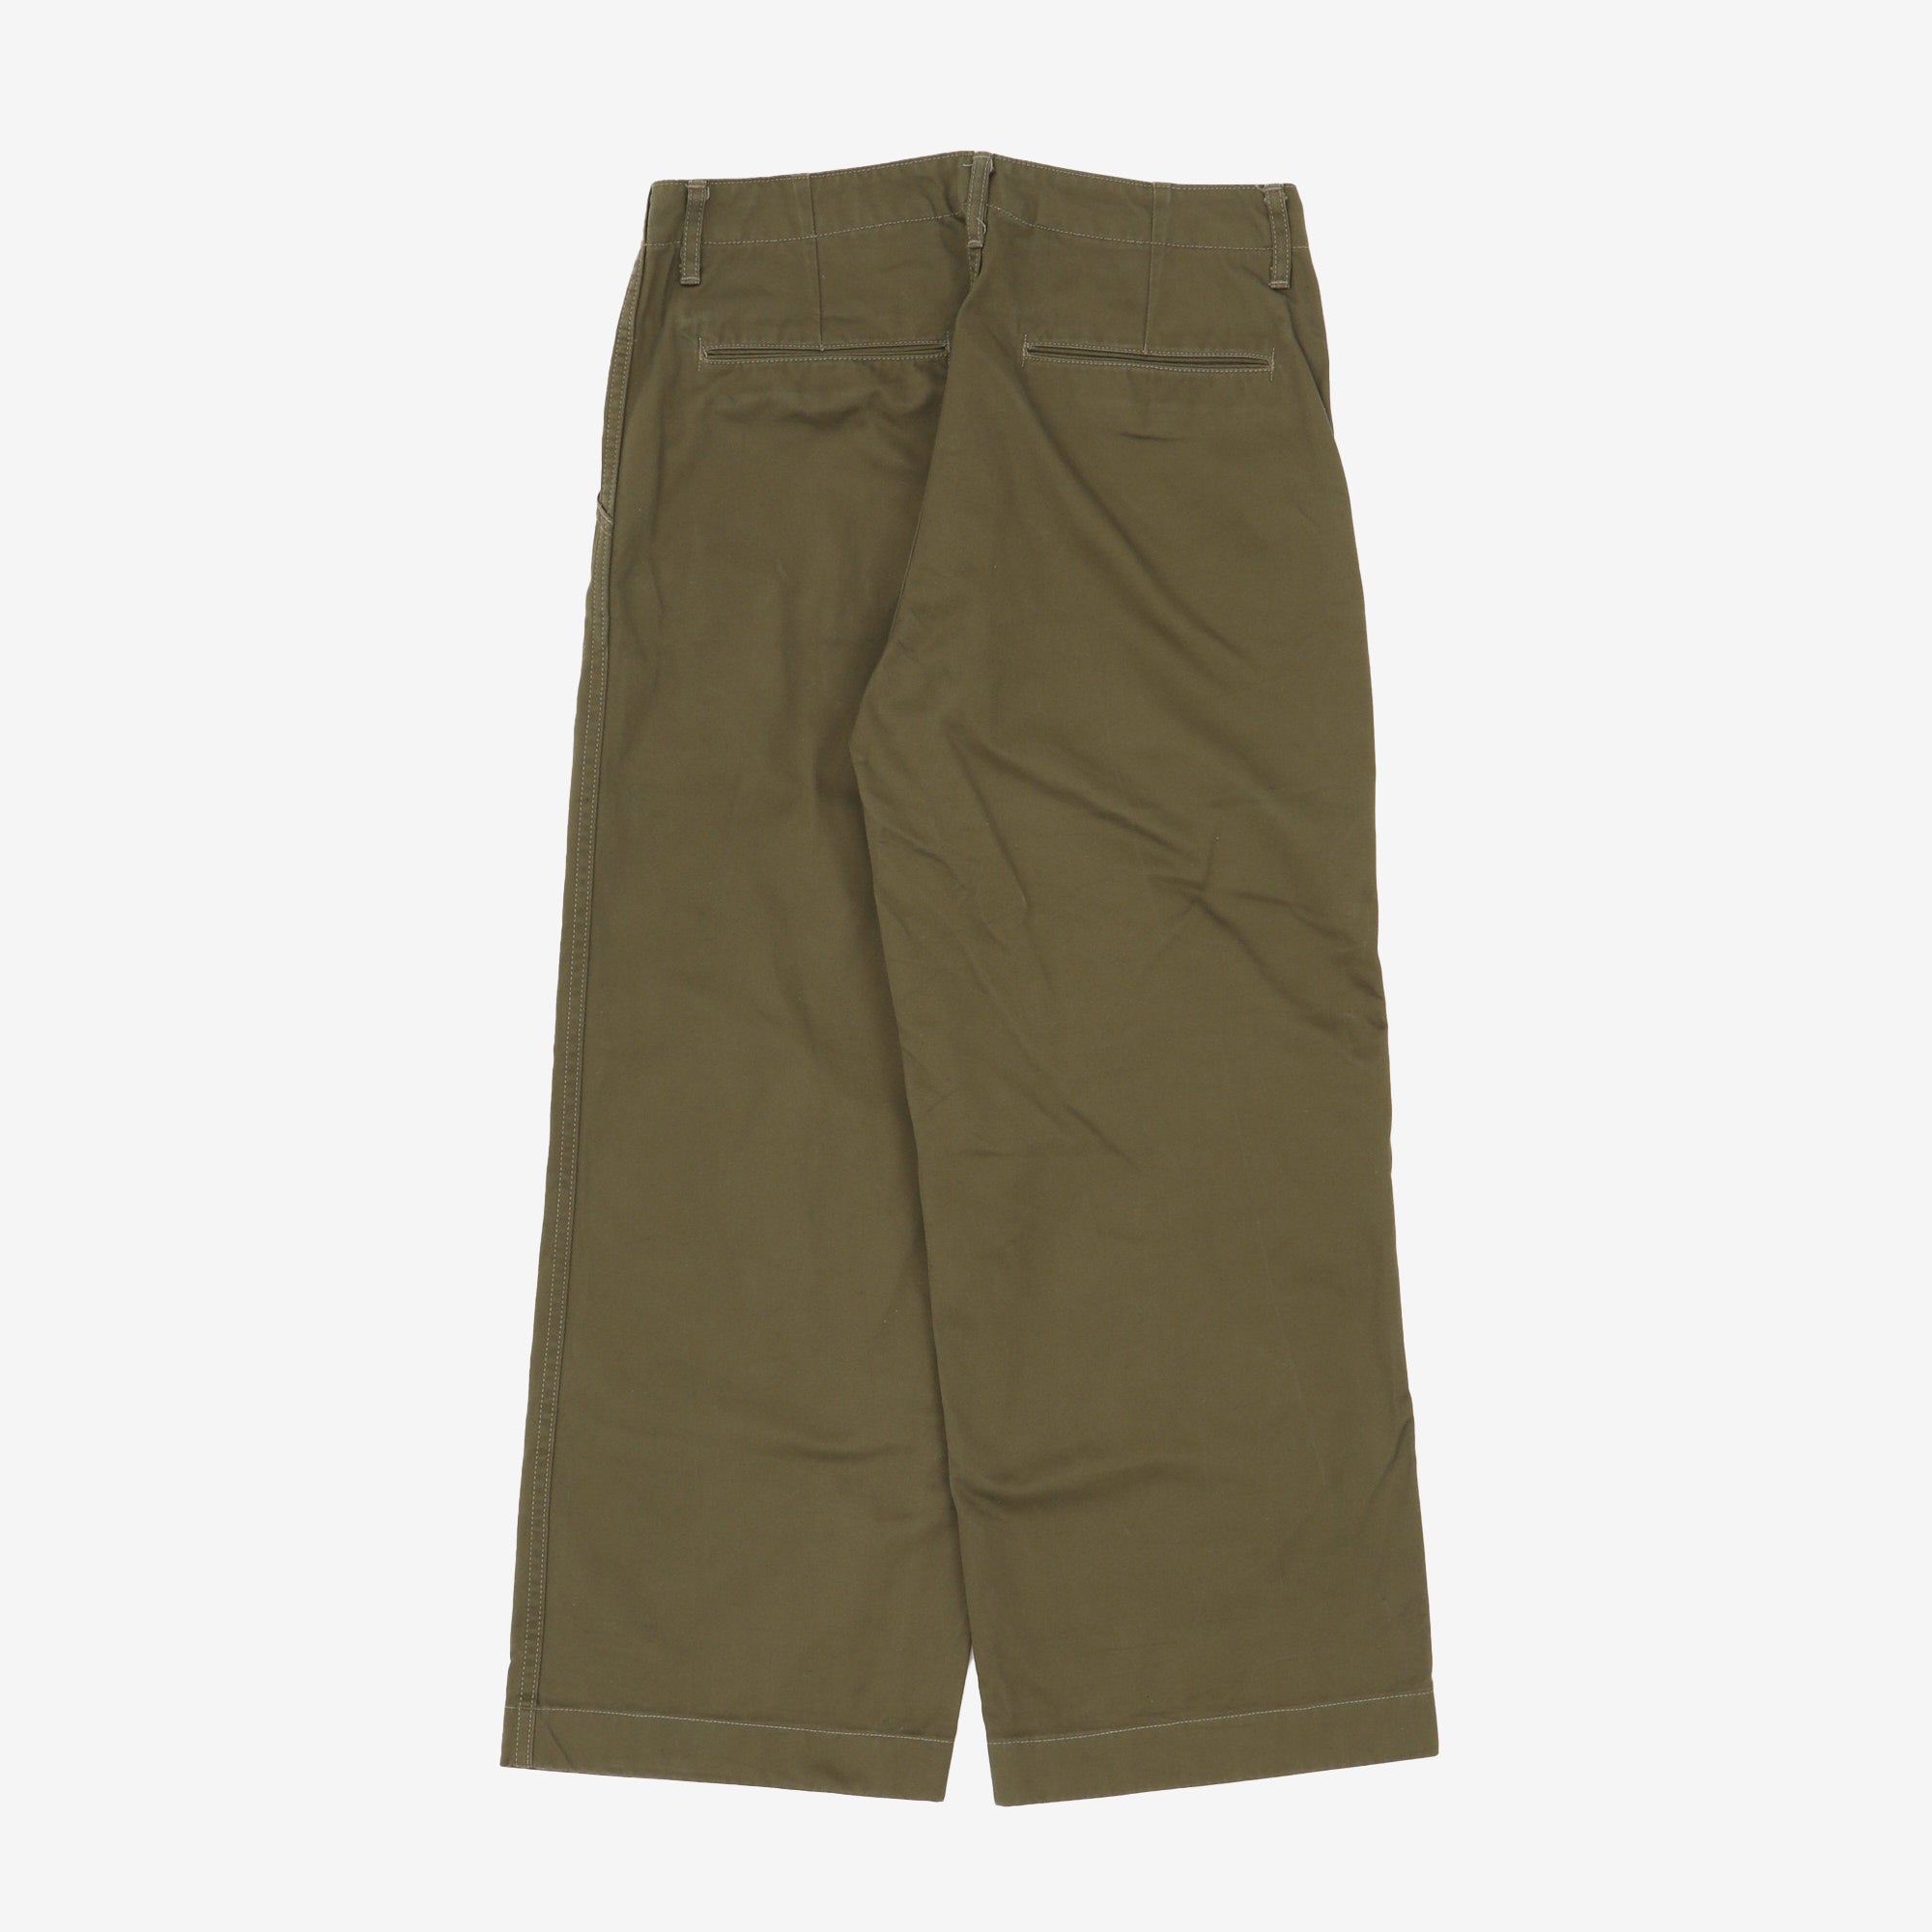 Army Trousers